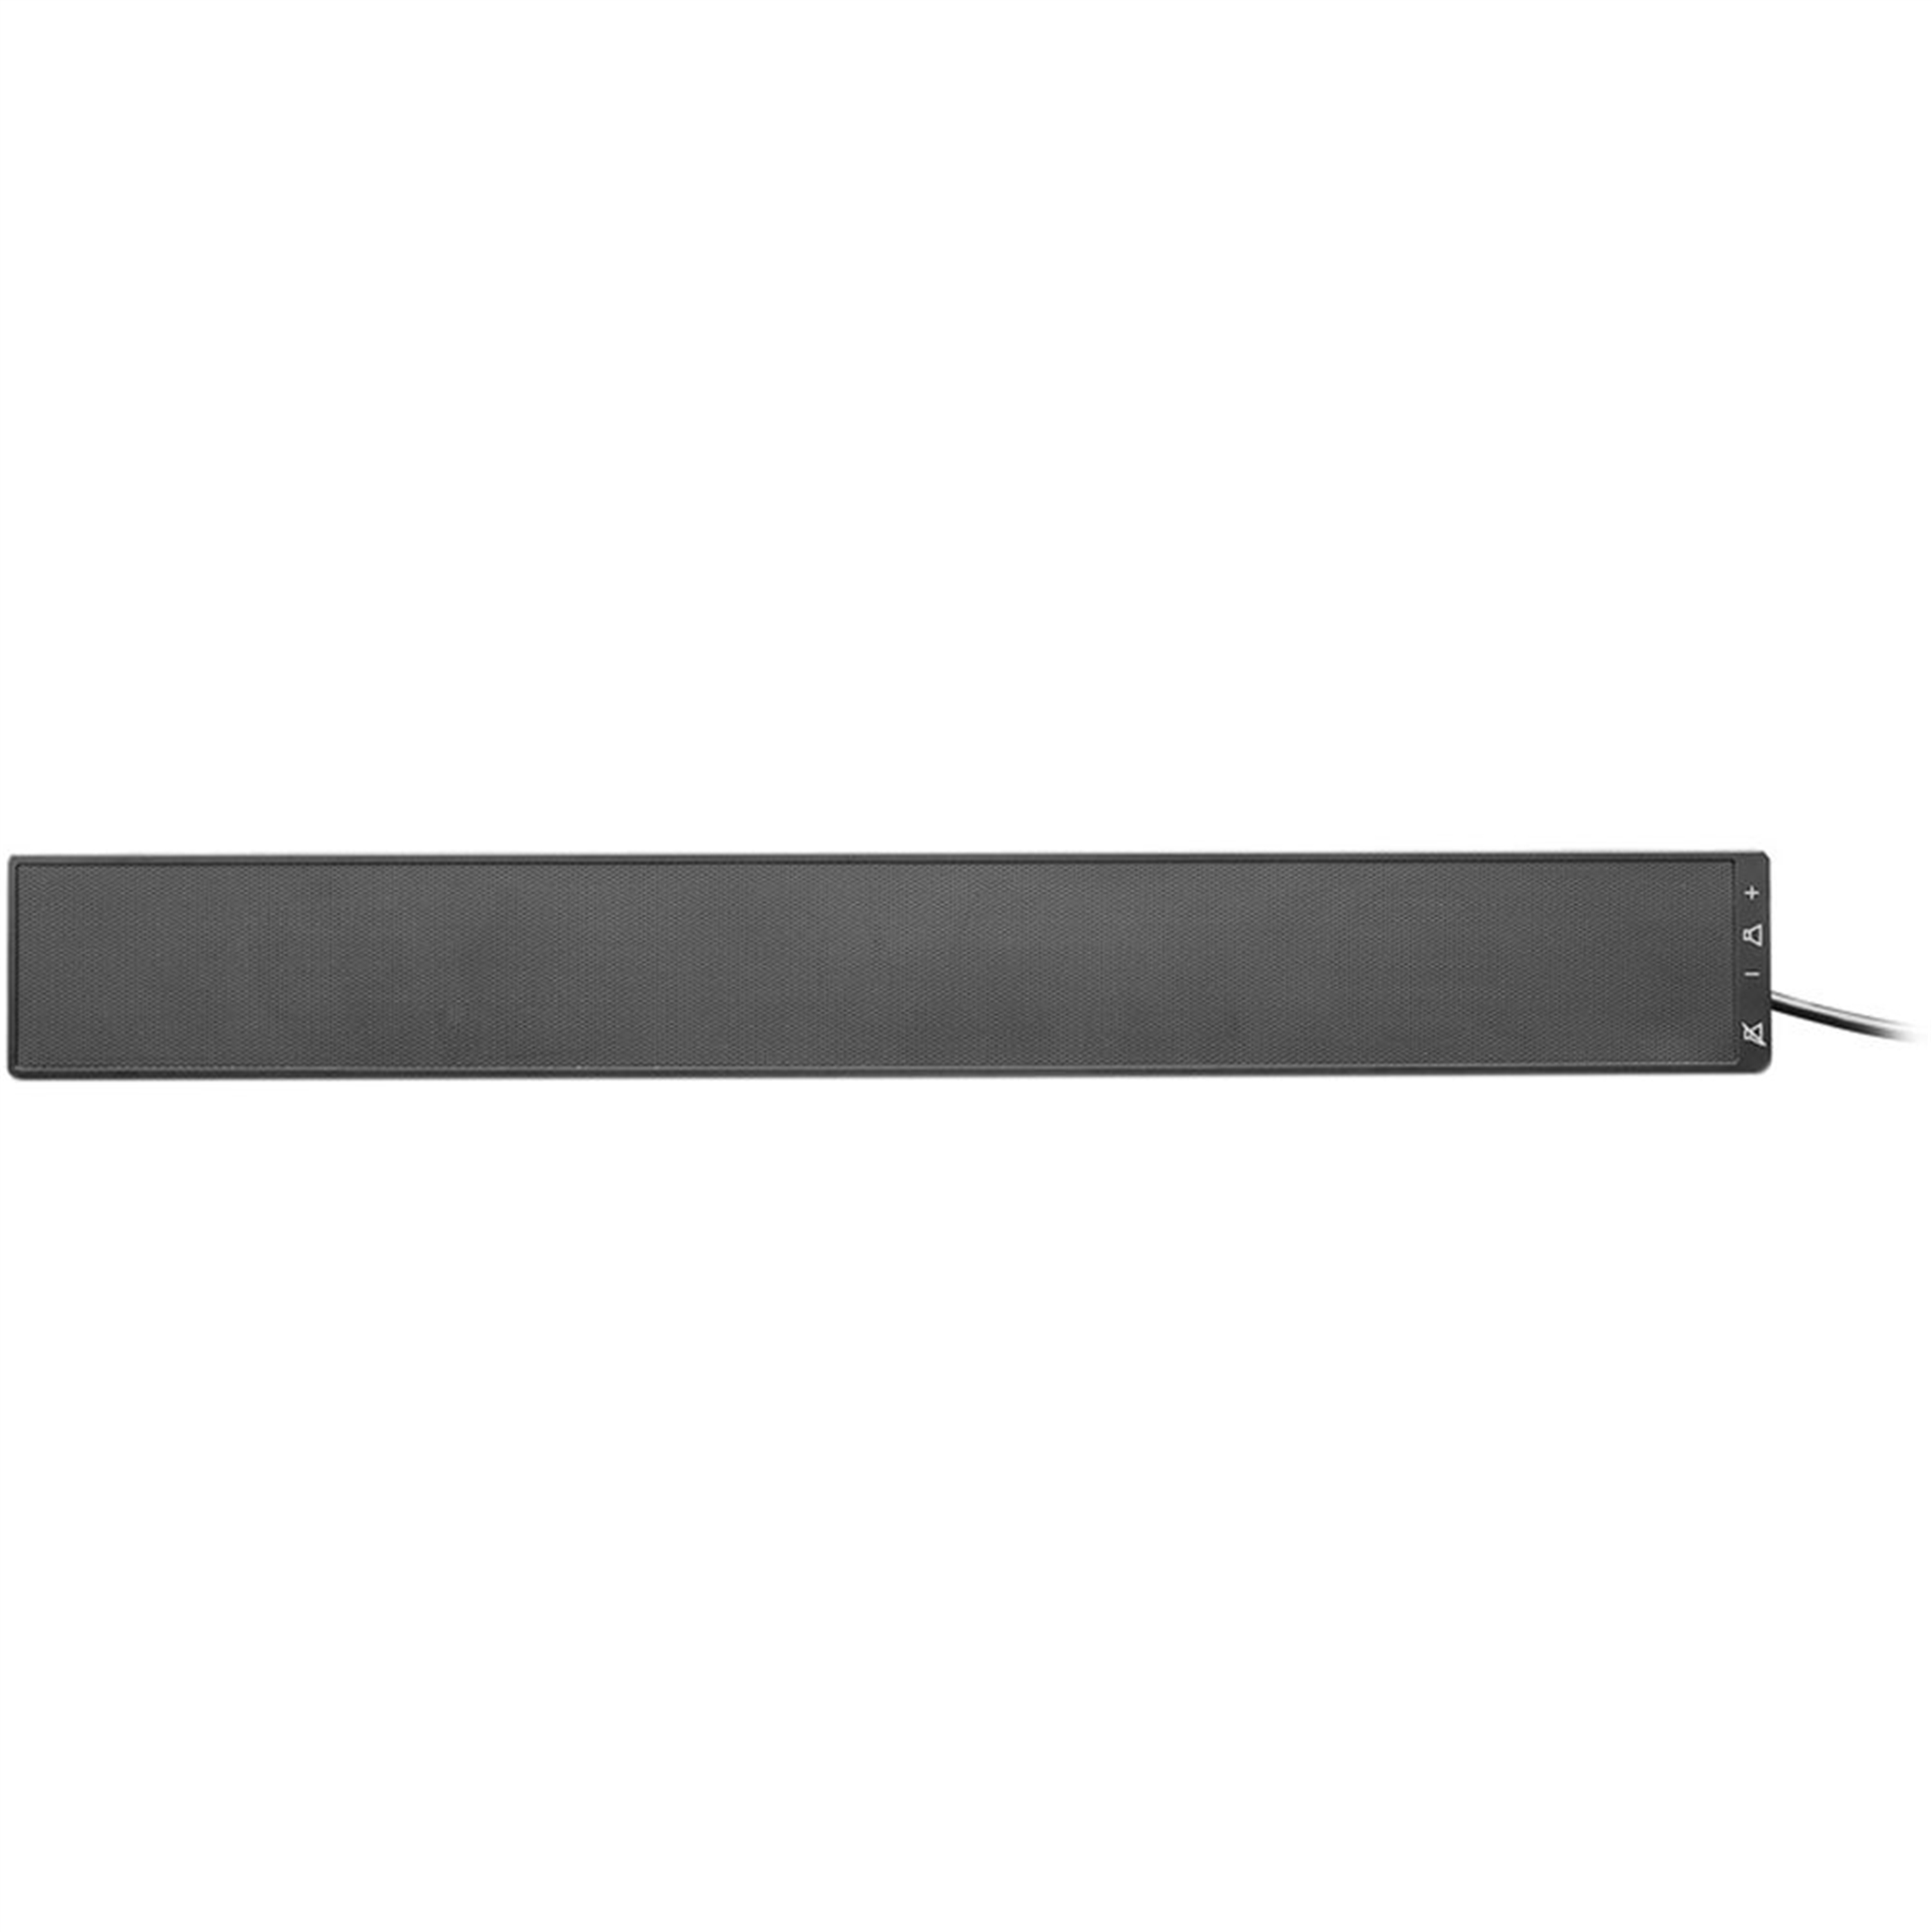 Lenovo 0A36190 2.0 Channel Home Theater Sound Bar, Black (Scratch And Dent Used) - image 2 of 3